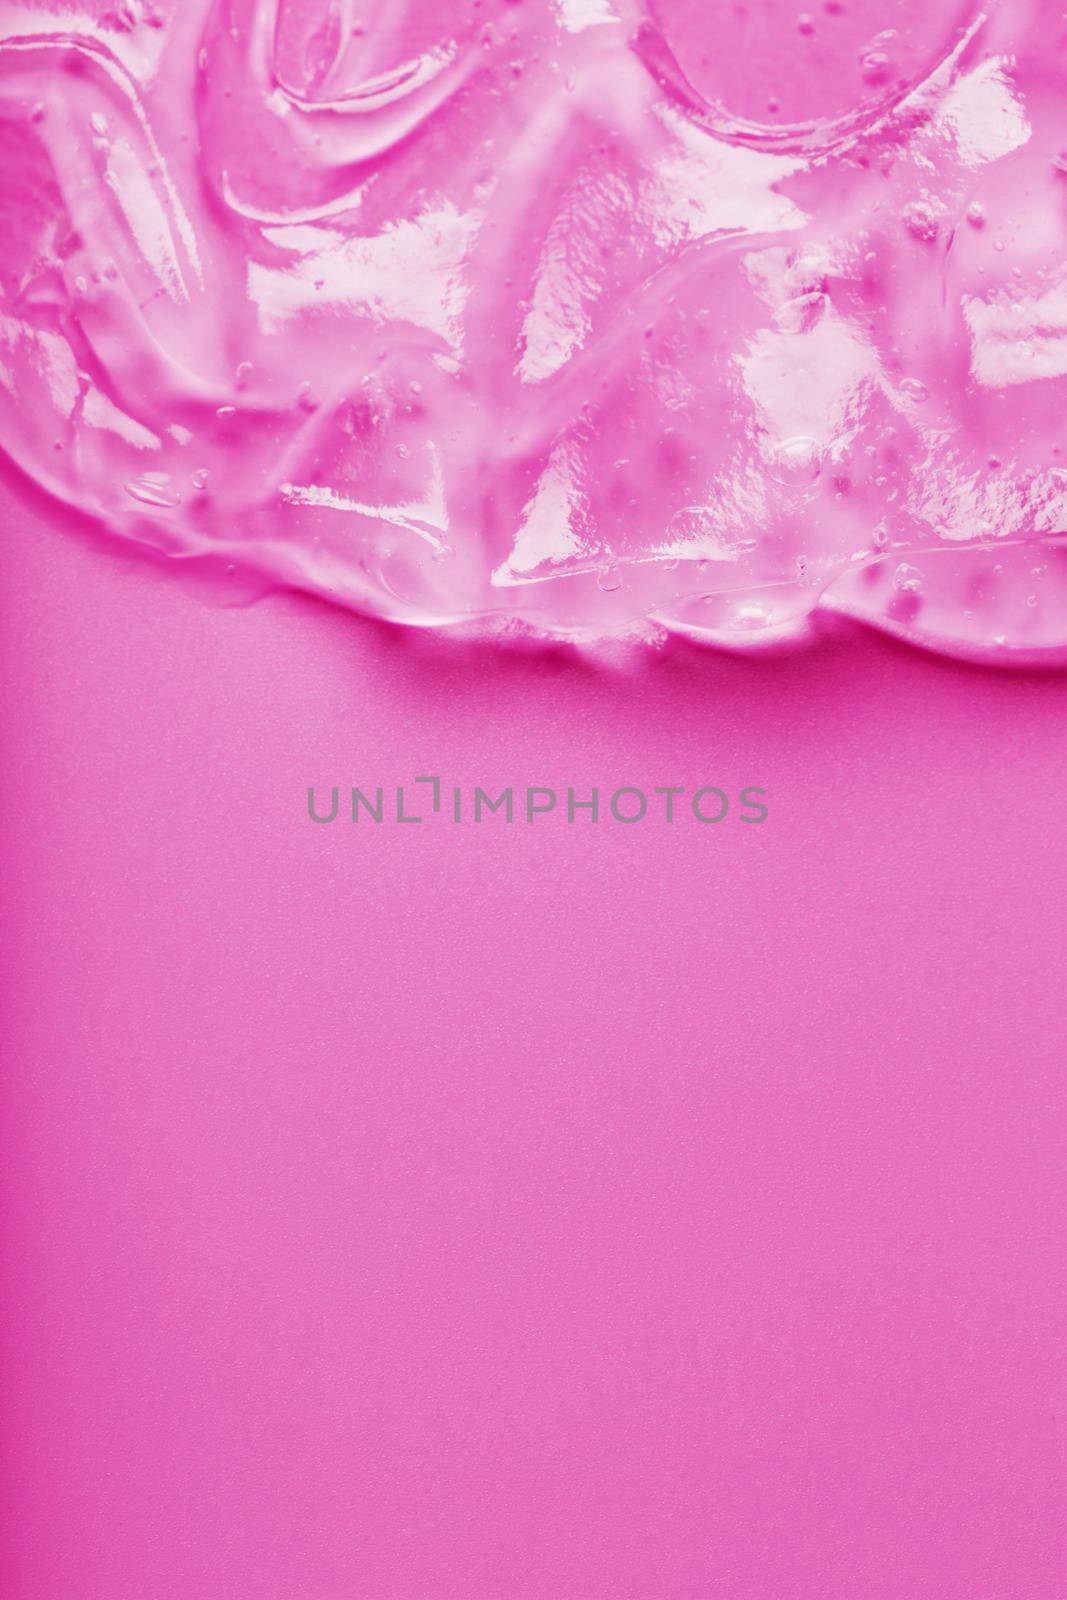 Transparent liquid gel on a pink background with free space. Antiseptic, cosmetic gel